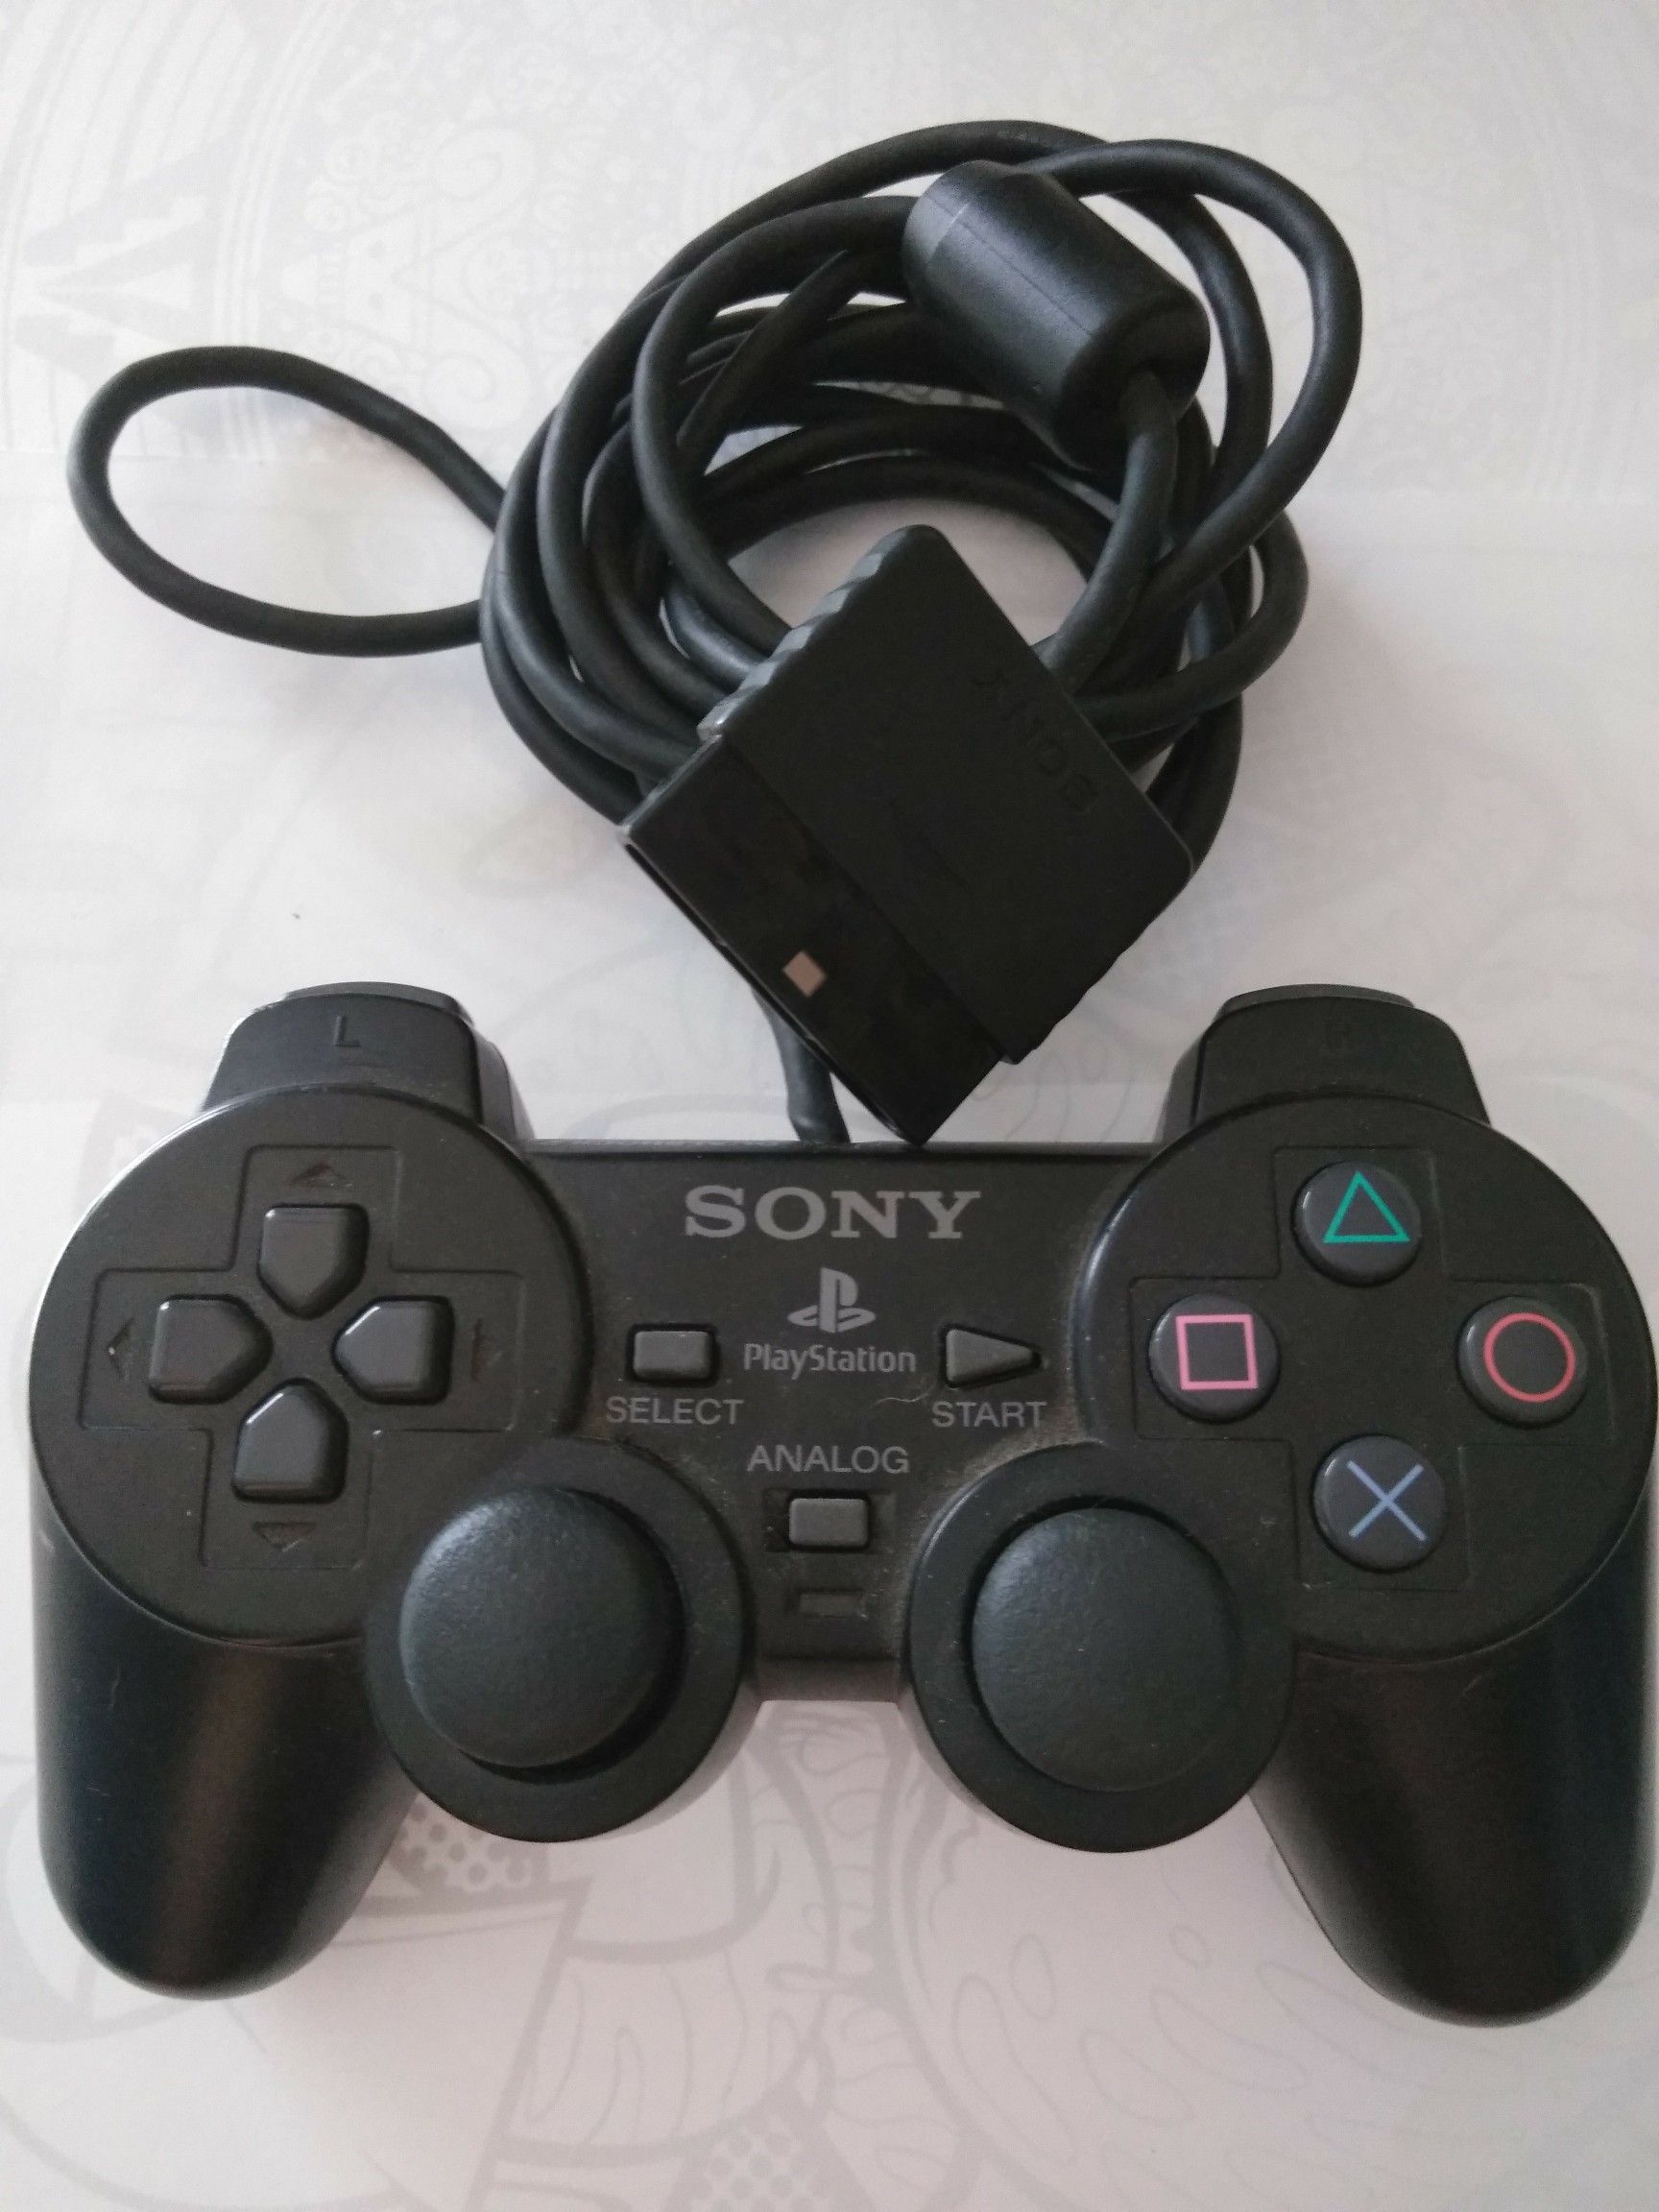 Sony PlayStation Controller Compatible w/both PS1 & PS2,Dual Shock 2. I have more Old Controllers See PG Ill Bundle deal if u want another